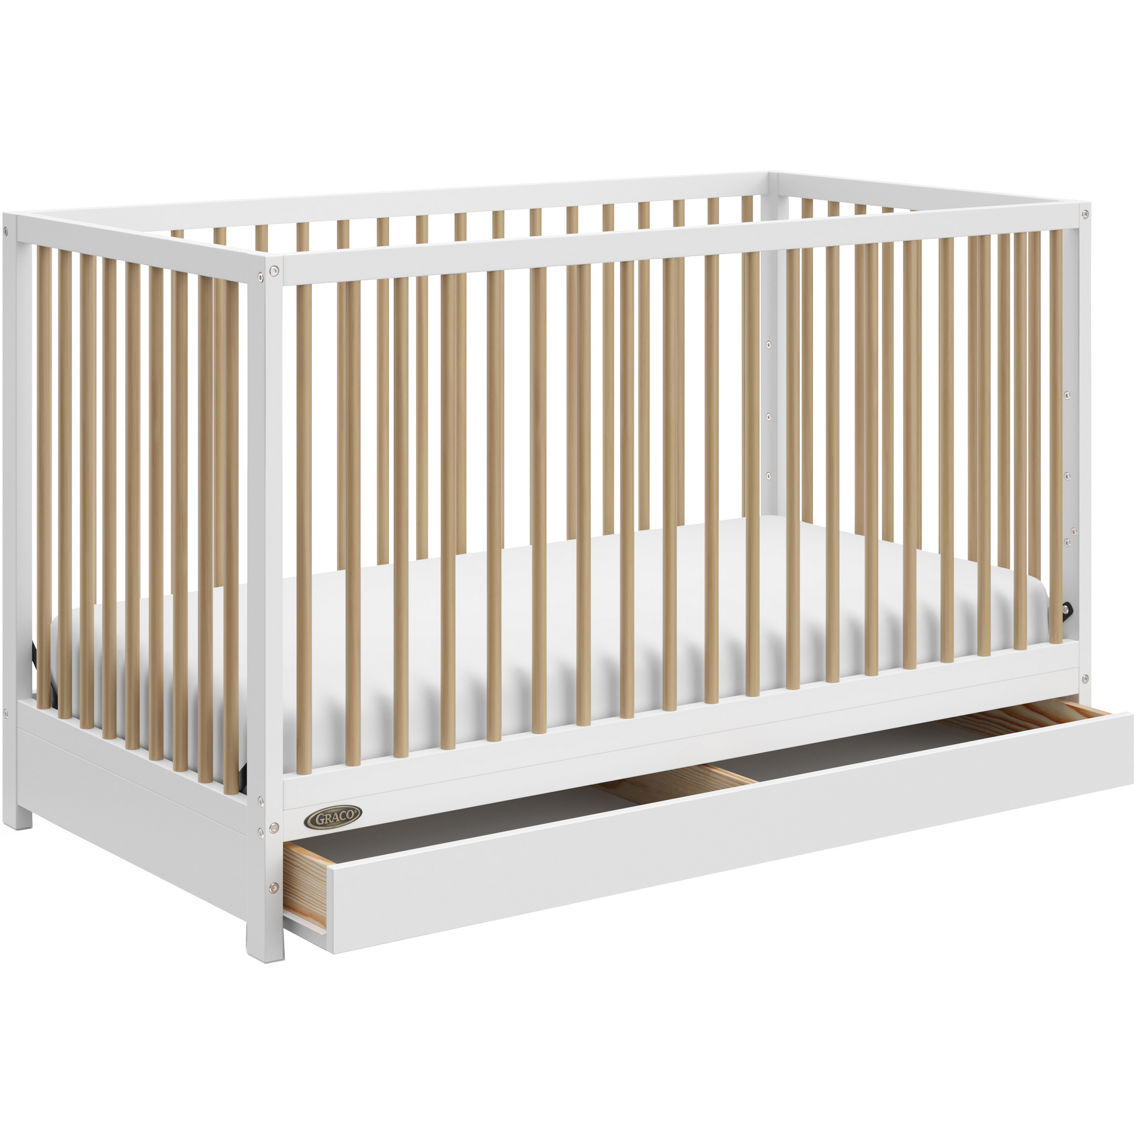 Graco Teddi 5-in-1 Convertible Crib with Drawer - Image 3 of 10